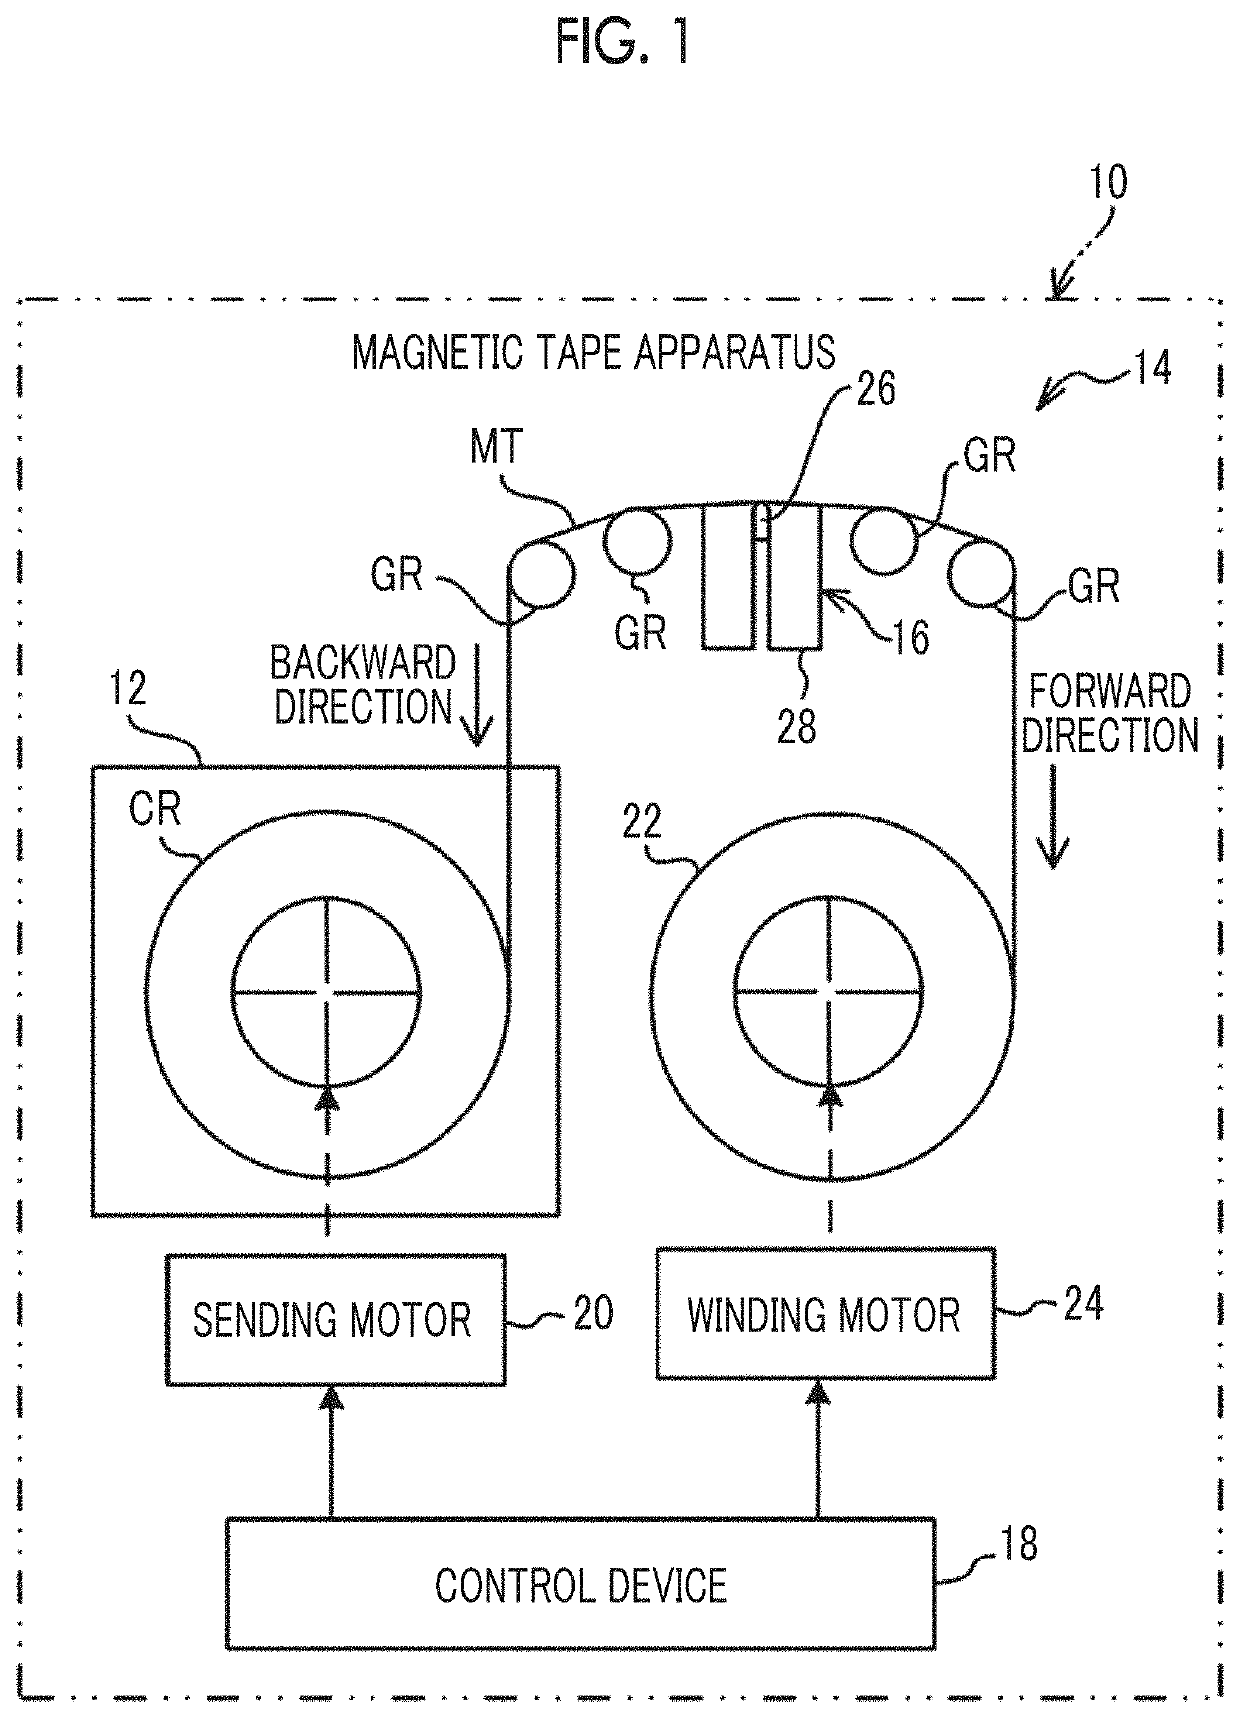 Magnetic tape, magnetic tape cartridge, and magnetic tape apparatus